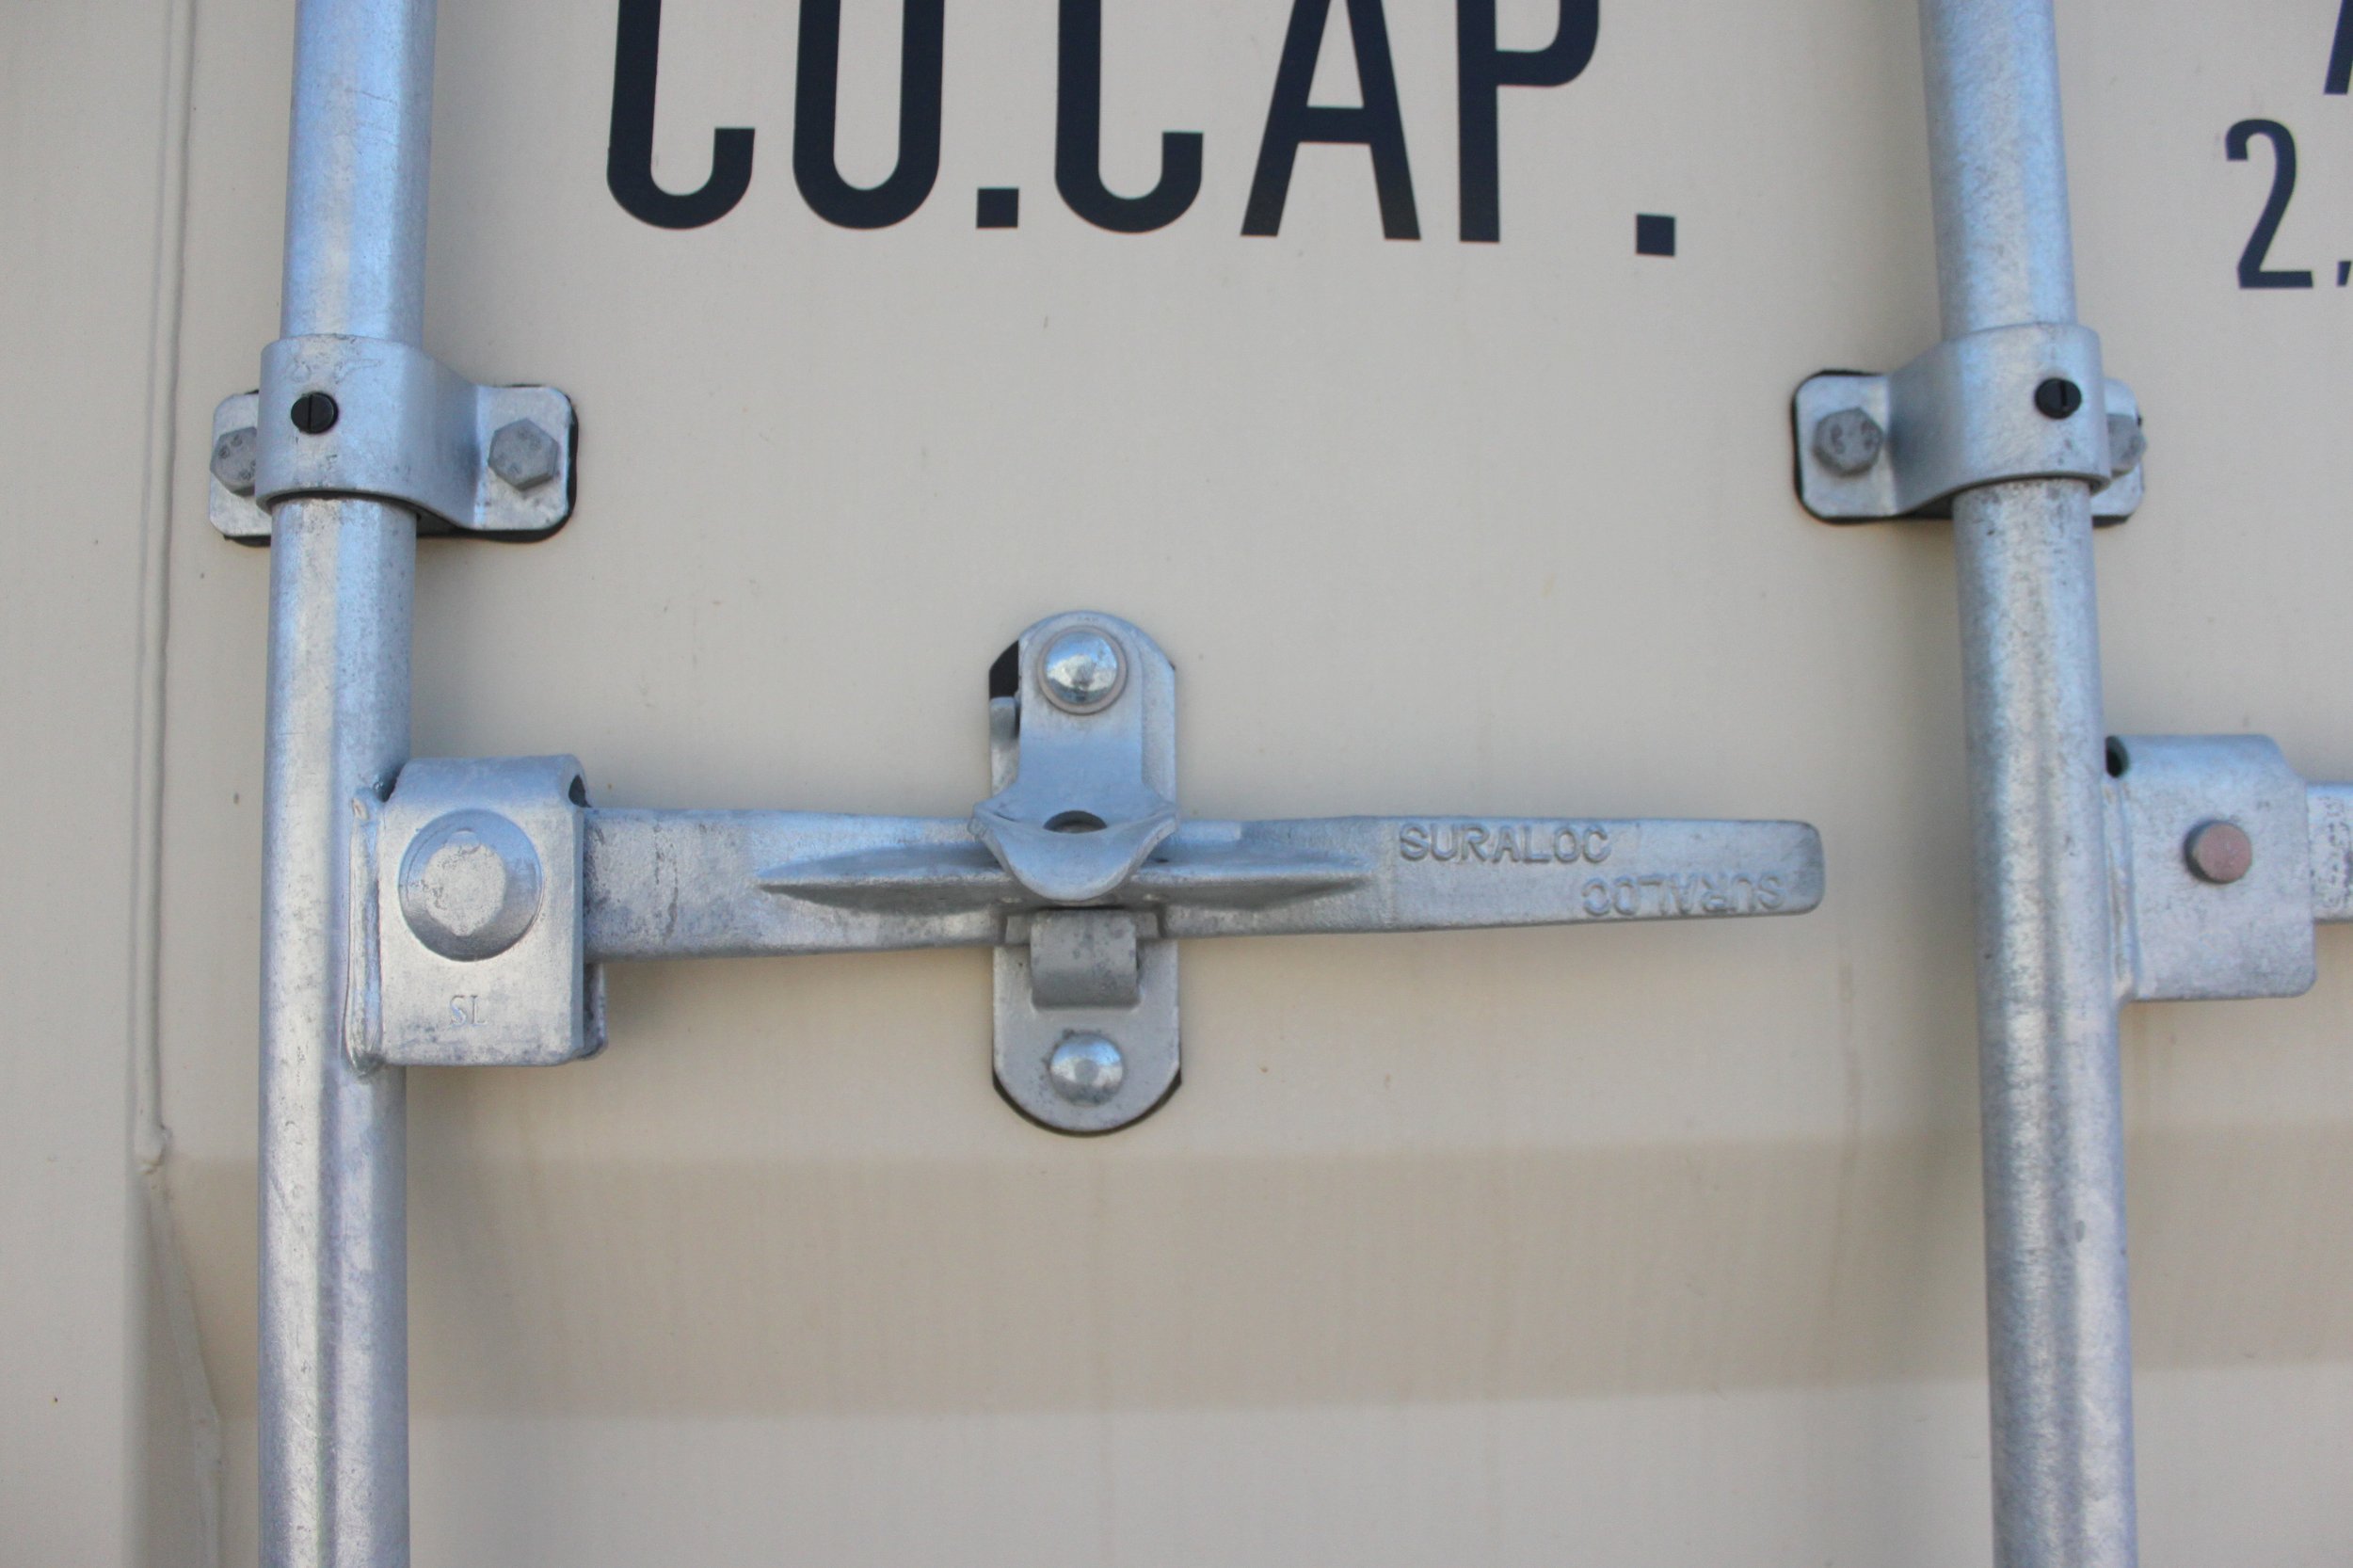 Container lever secured with securement loops